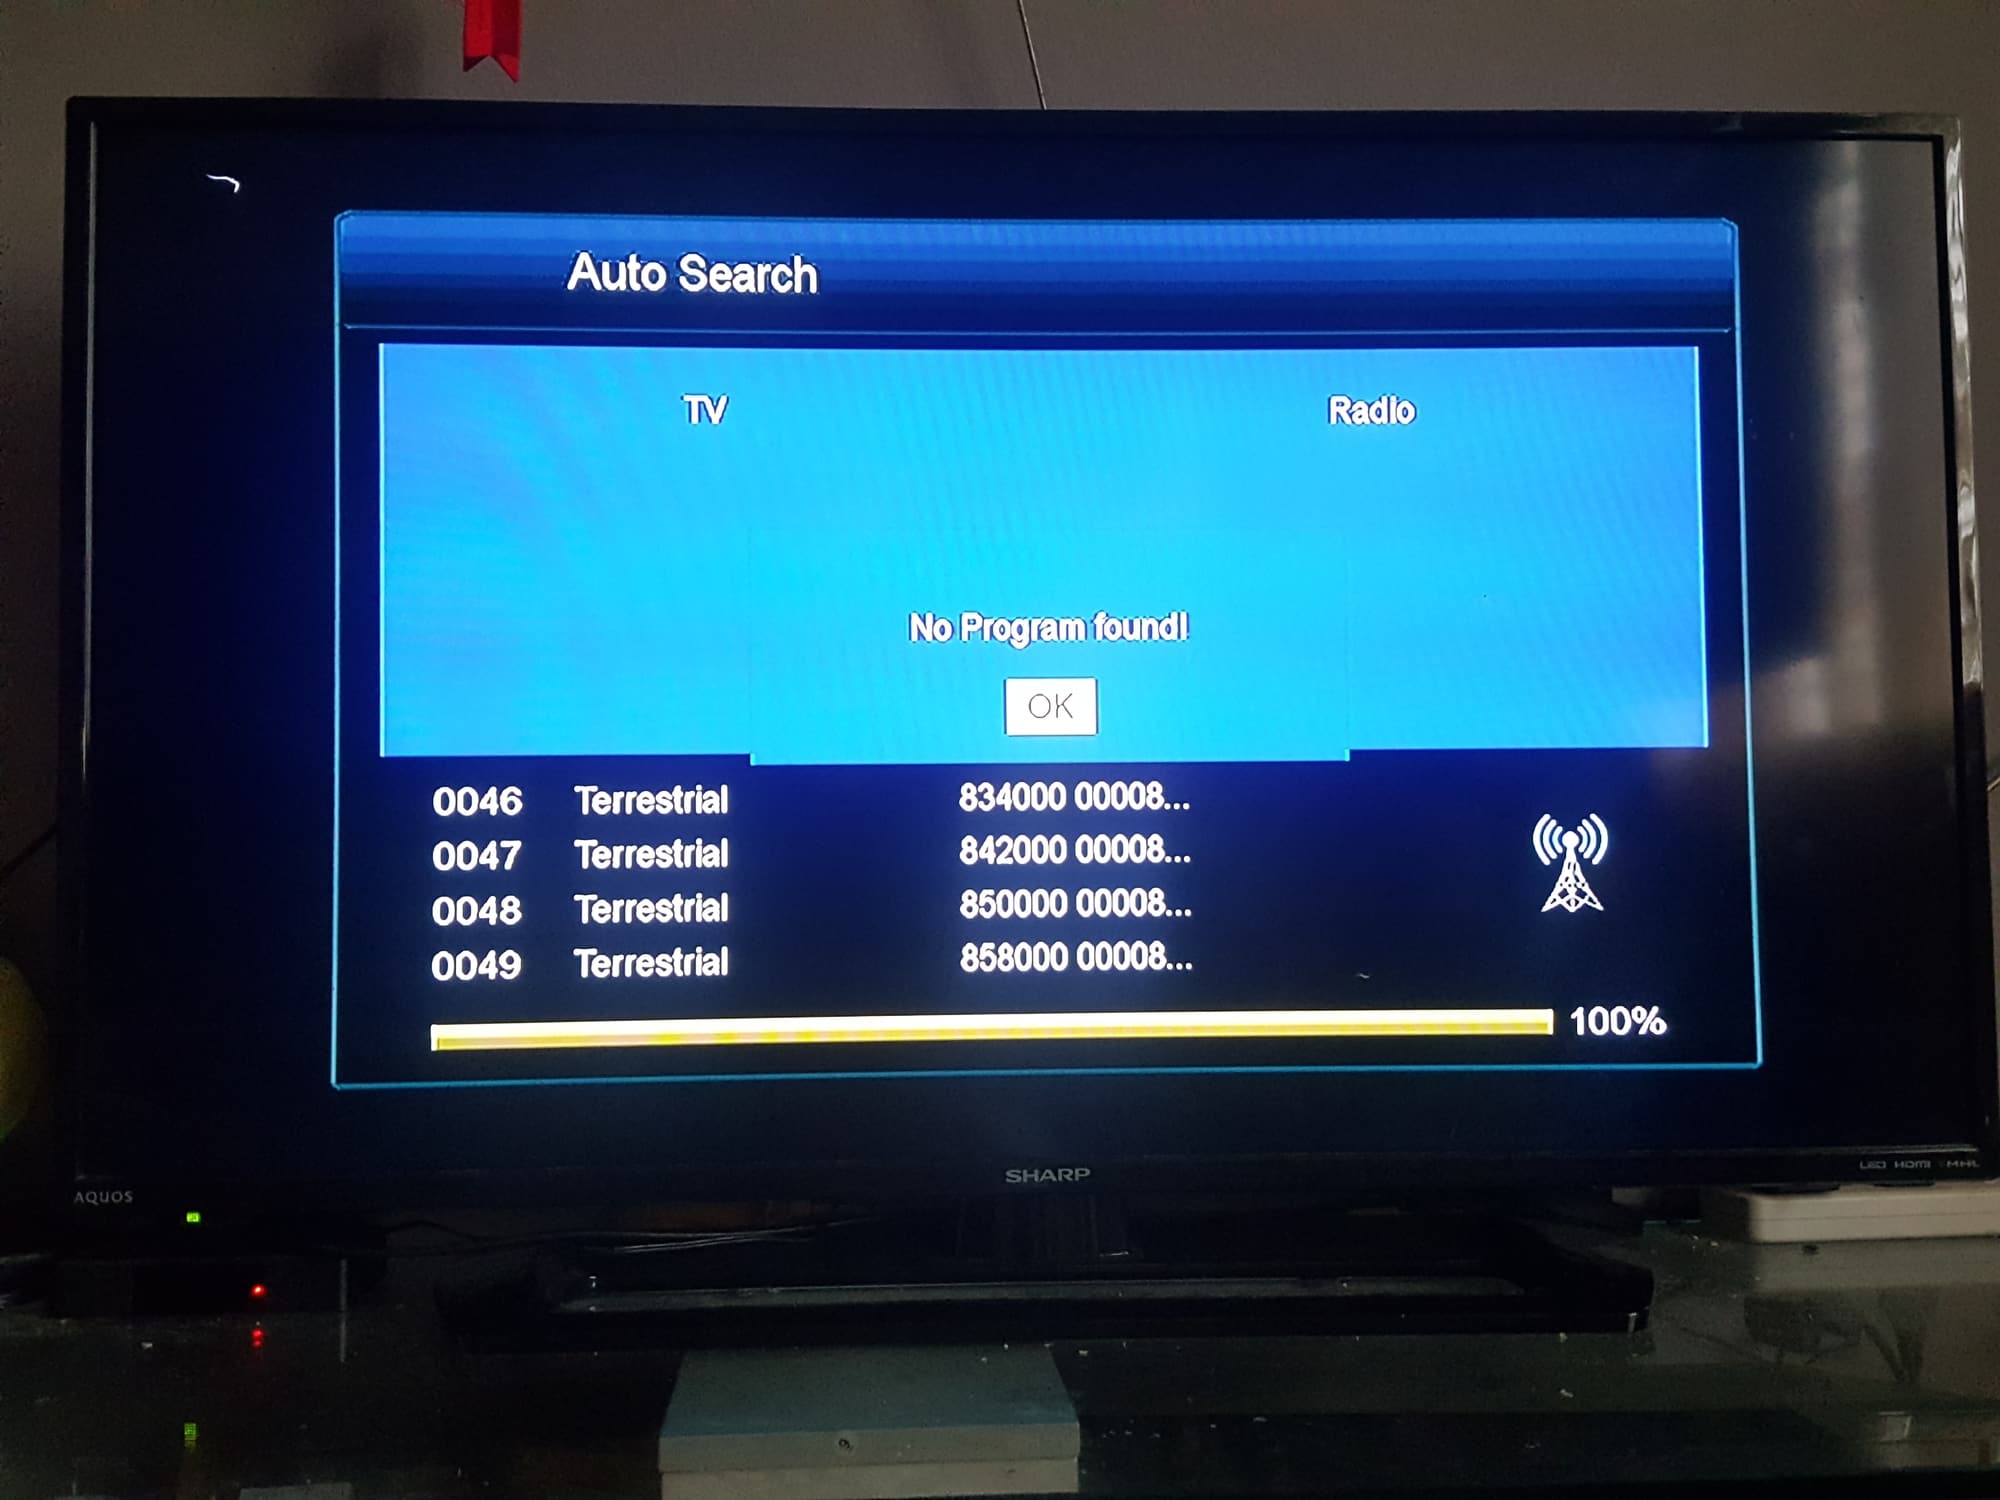 How To Switch To Cable On Samsung Smart TV